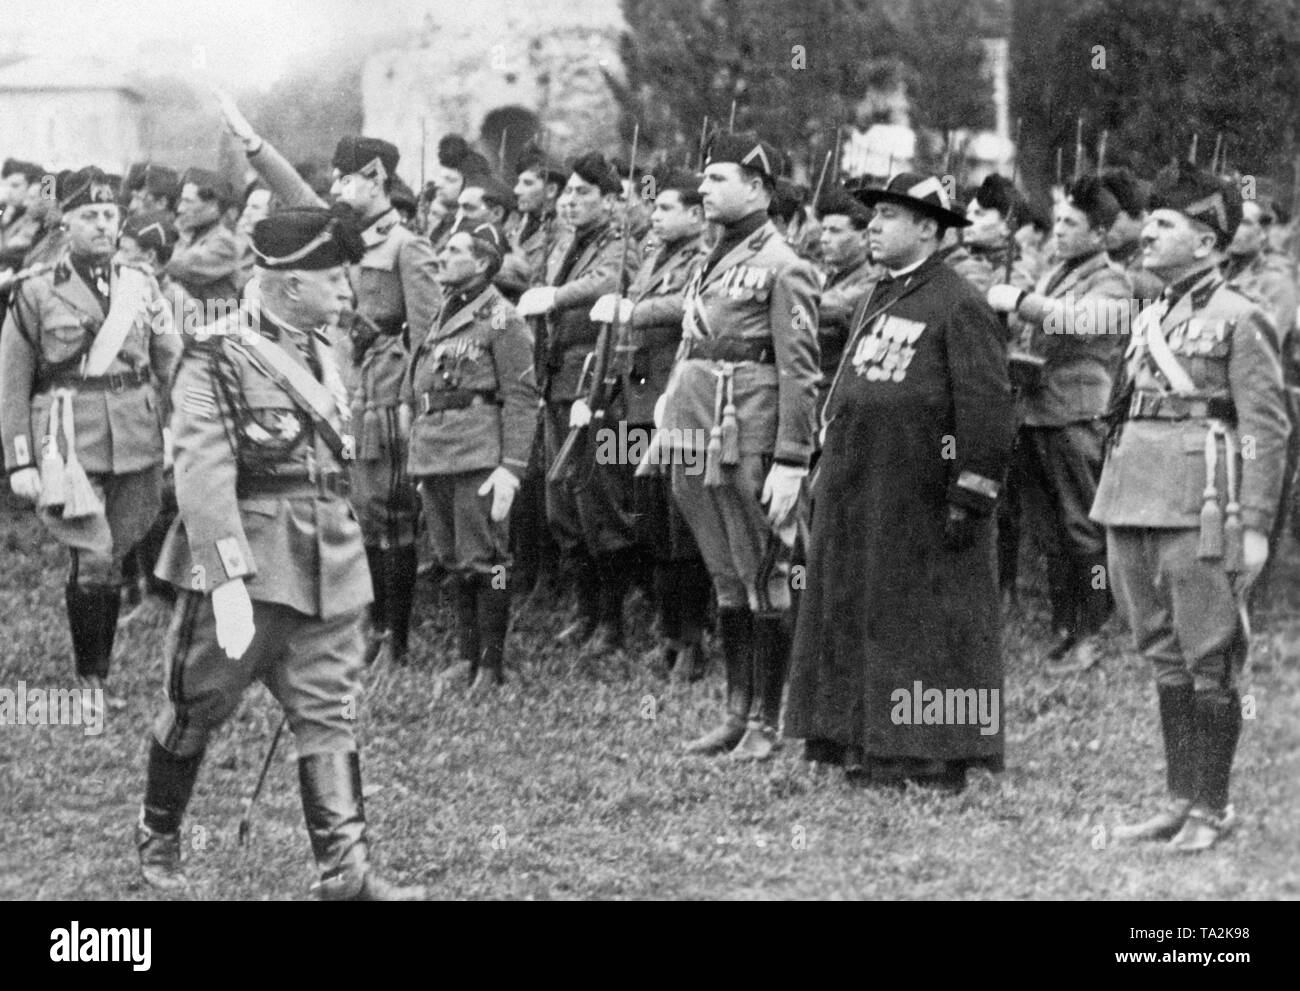 A decorated priest (2nd from right) takes part in a parade of the Italian fascist militia. Undated photo. The reconciliation of the Italian state and the Vatican culminated in the conclusion of the Lateran Treaties in 1929. Stock Photo